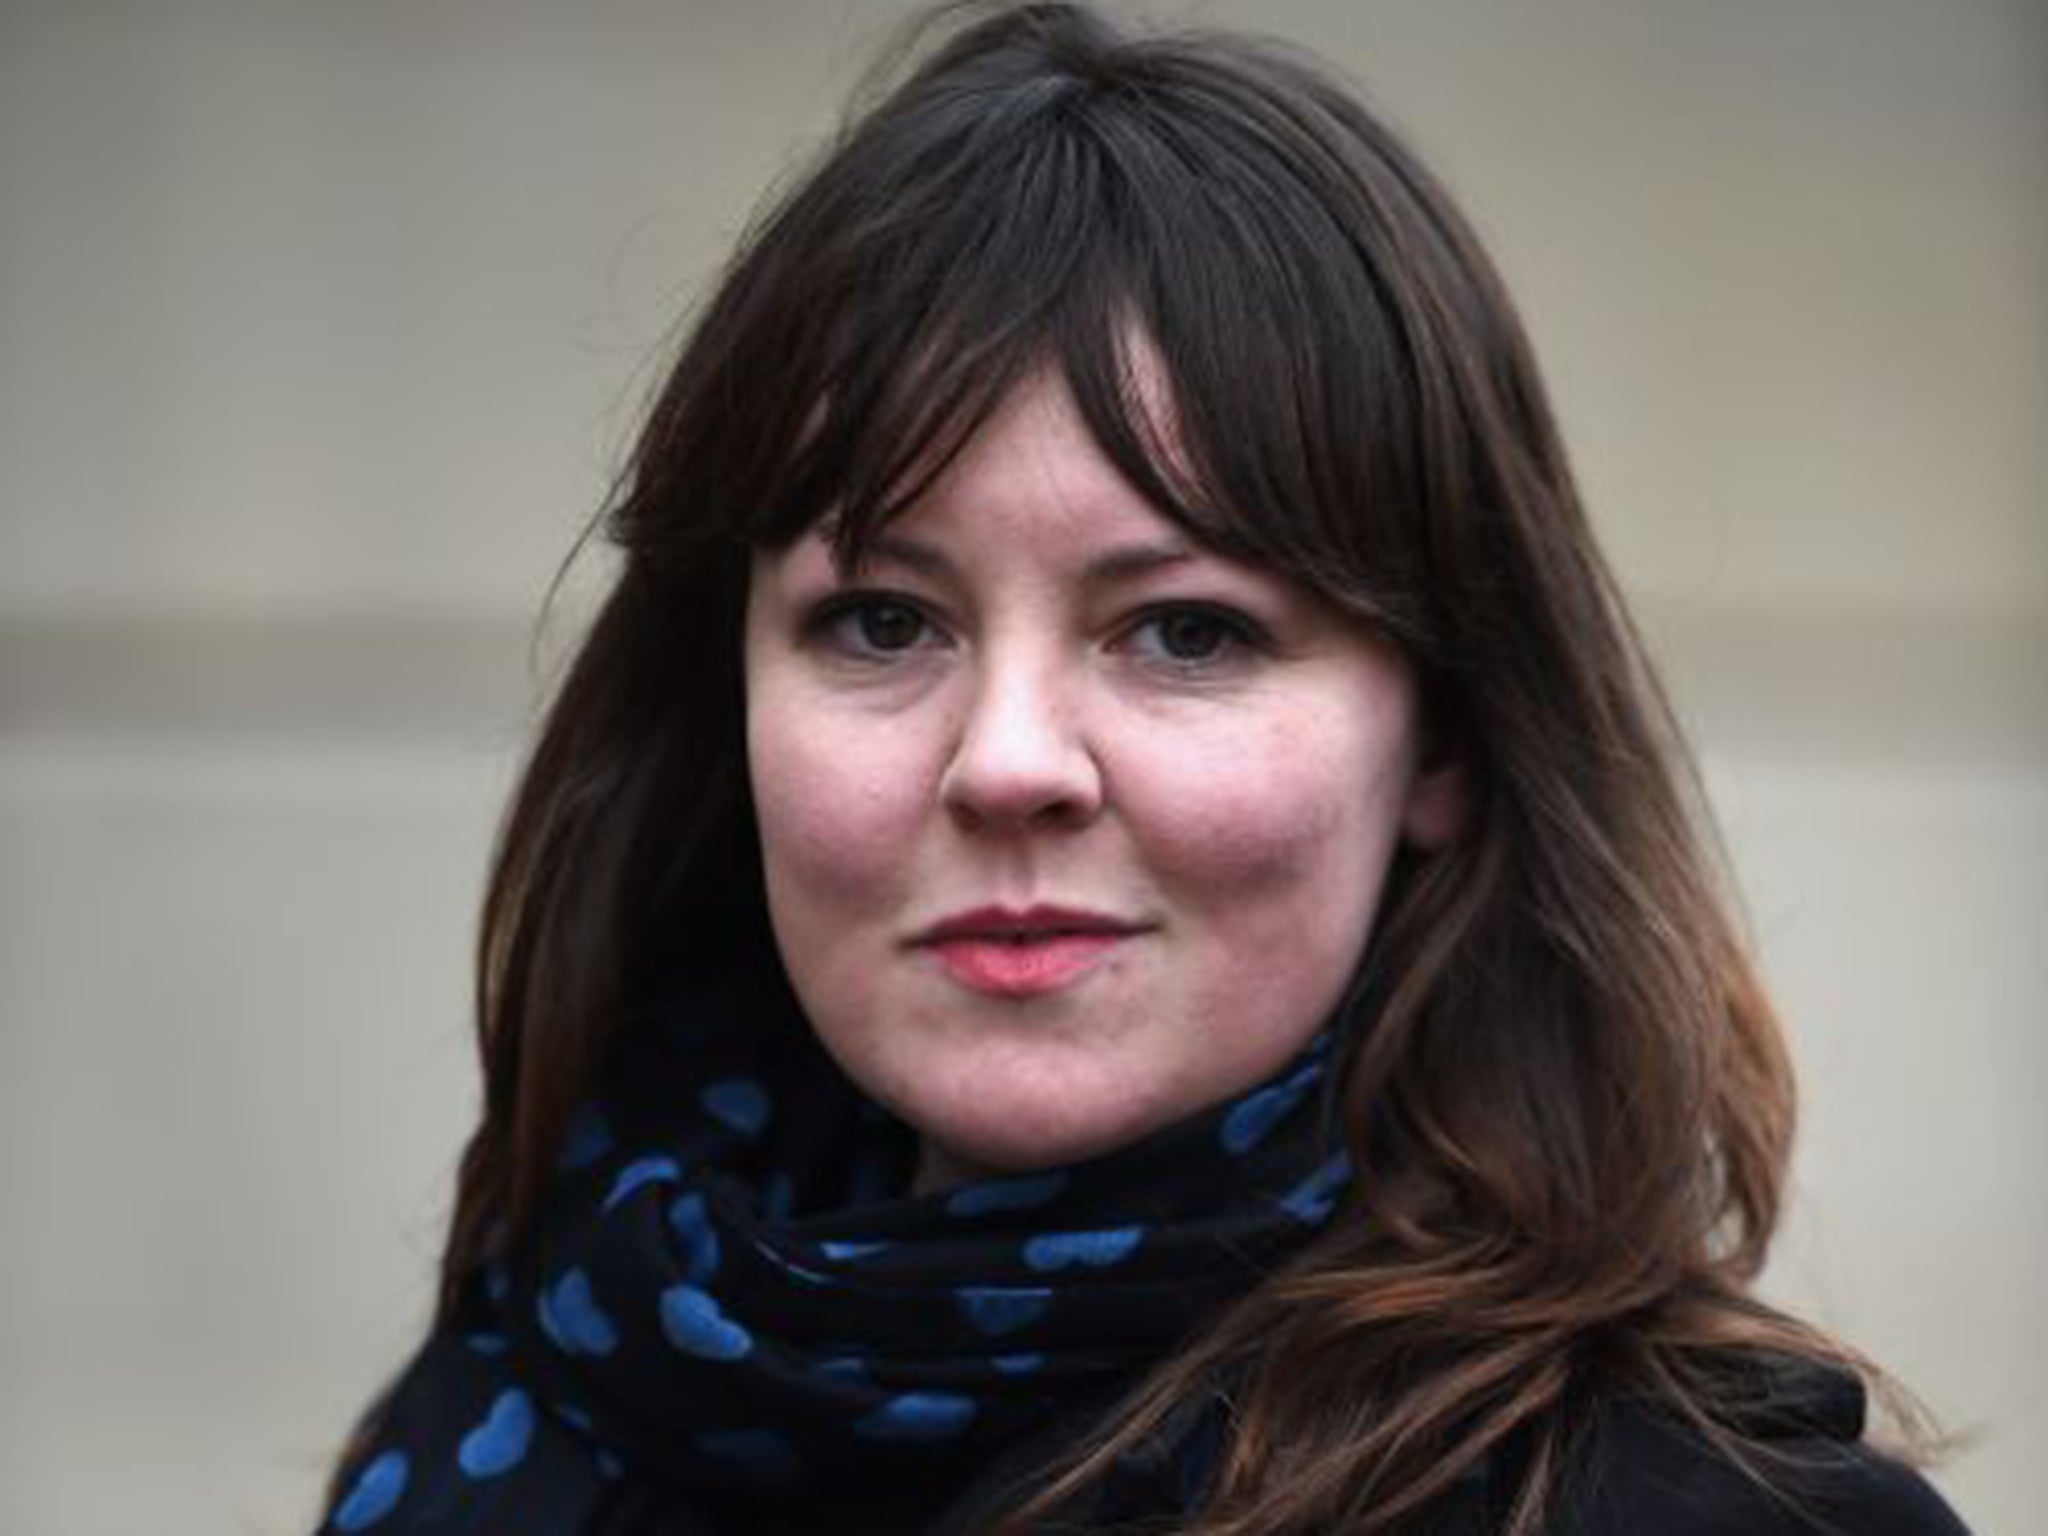 Natalie McGarry is the MP for Glasgow East